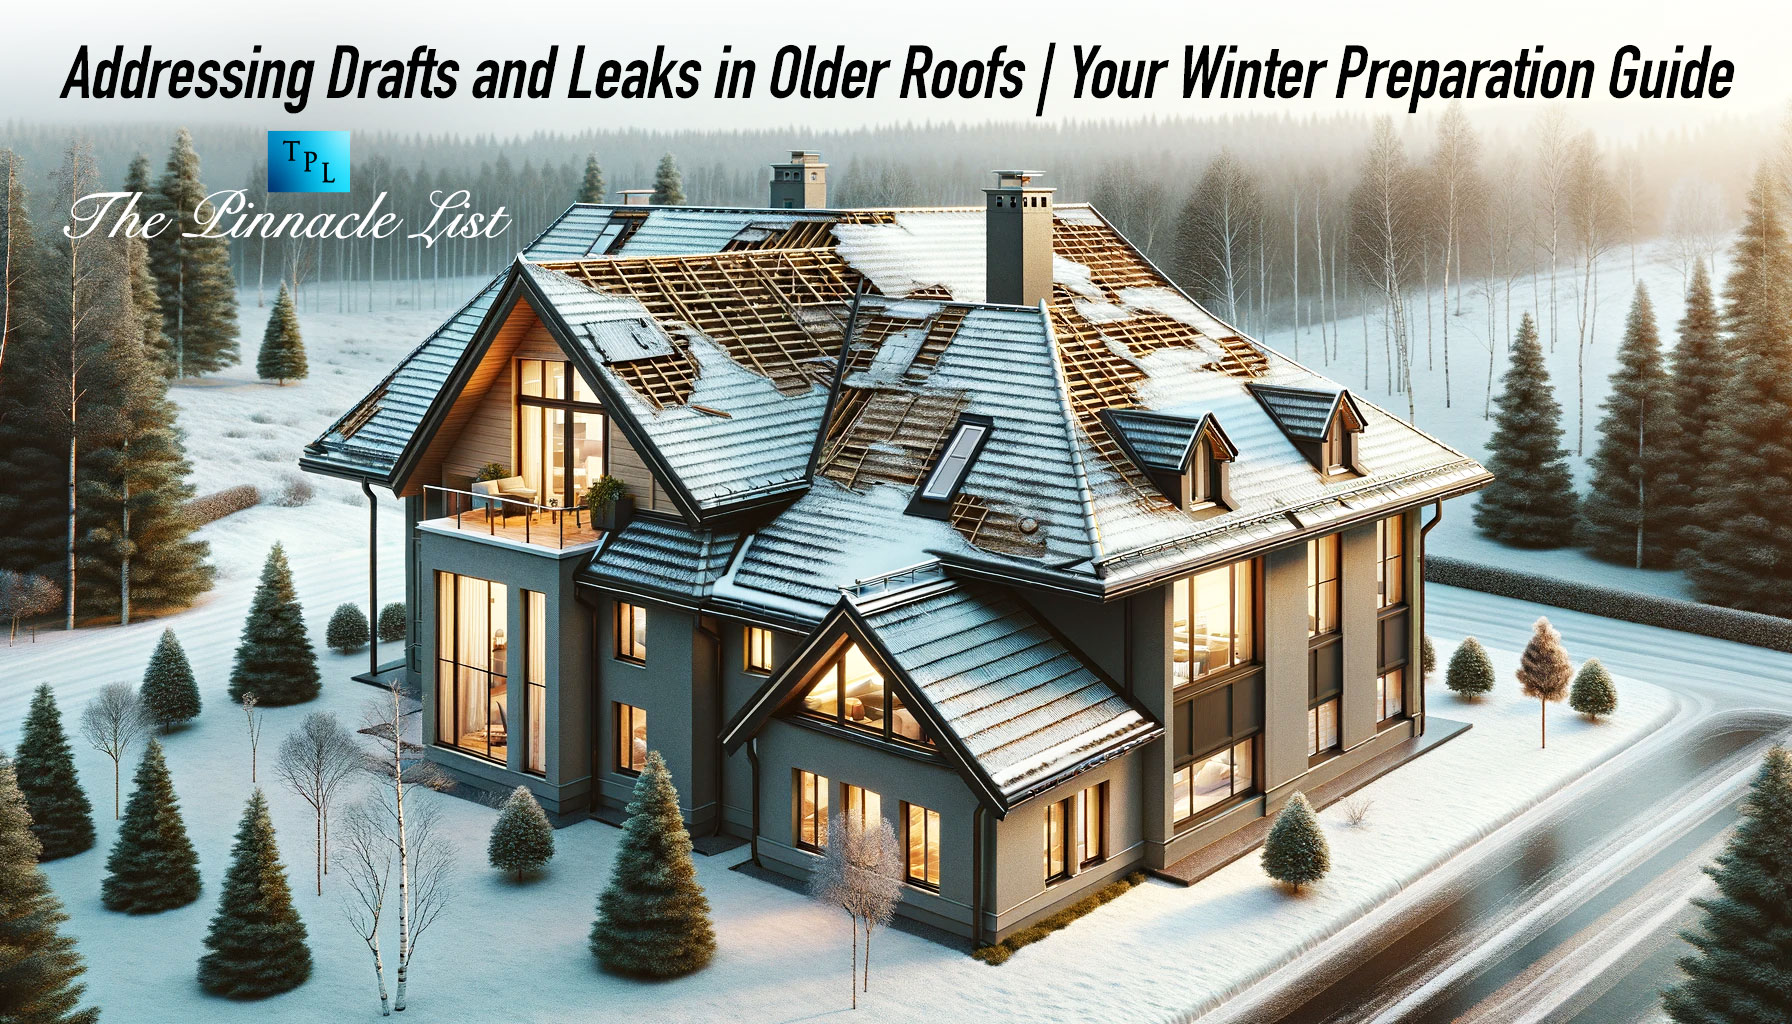 Addressing Drafts and Leaks in Older Roofs: Your Winter Preparation Guide